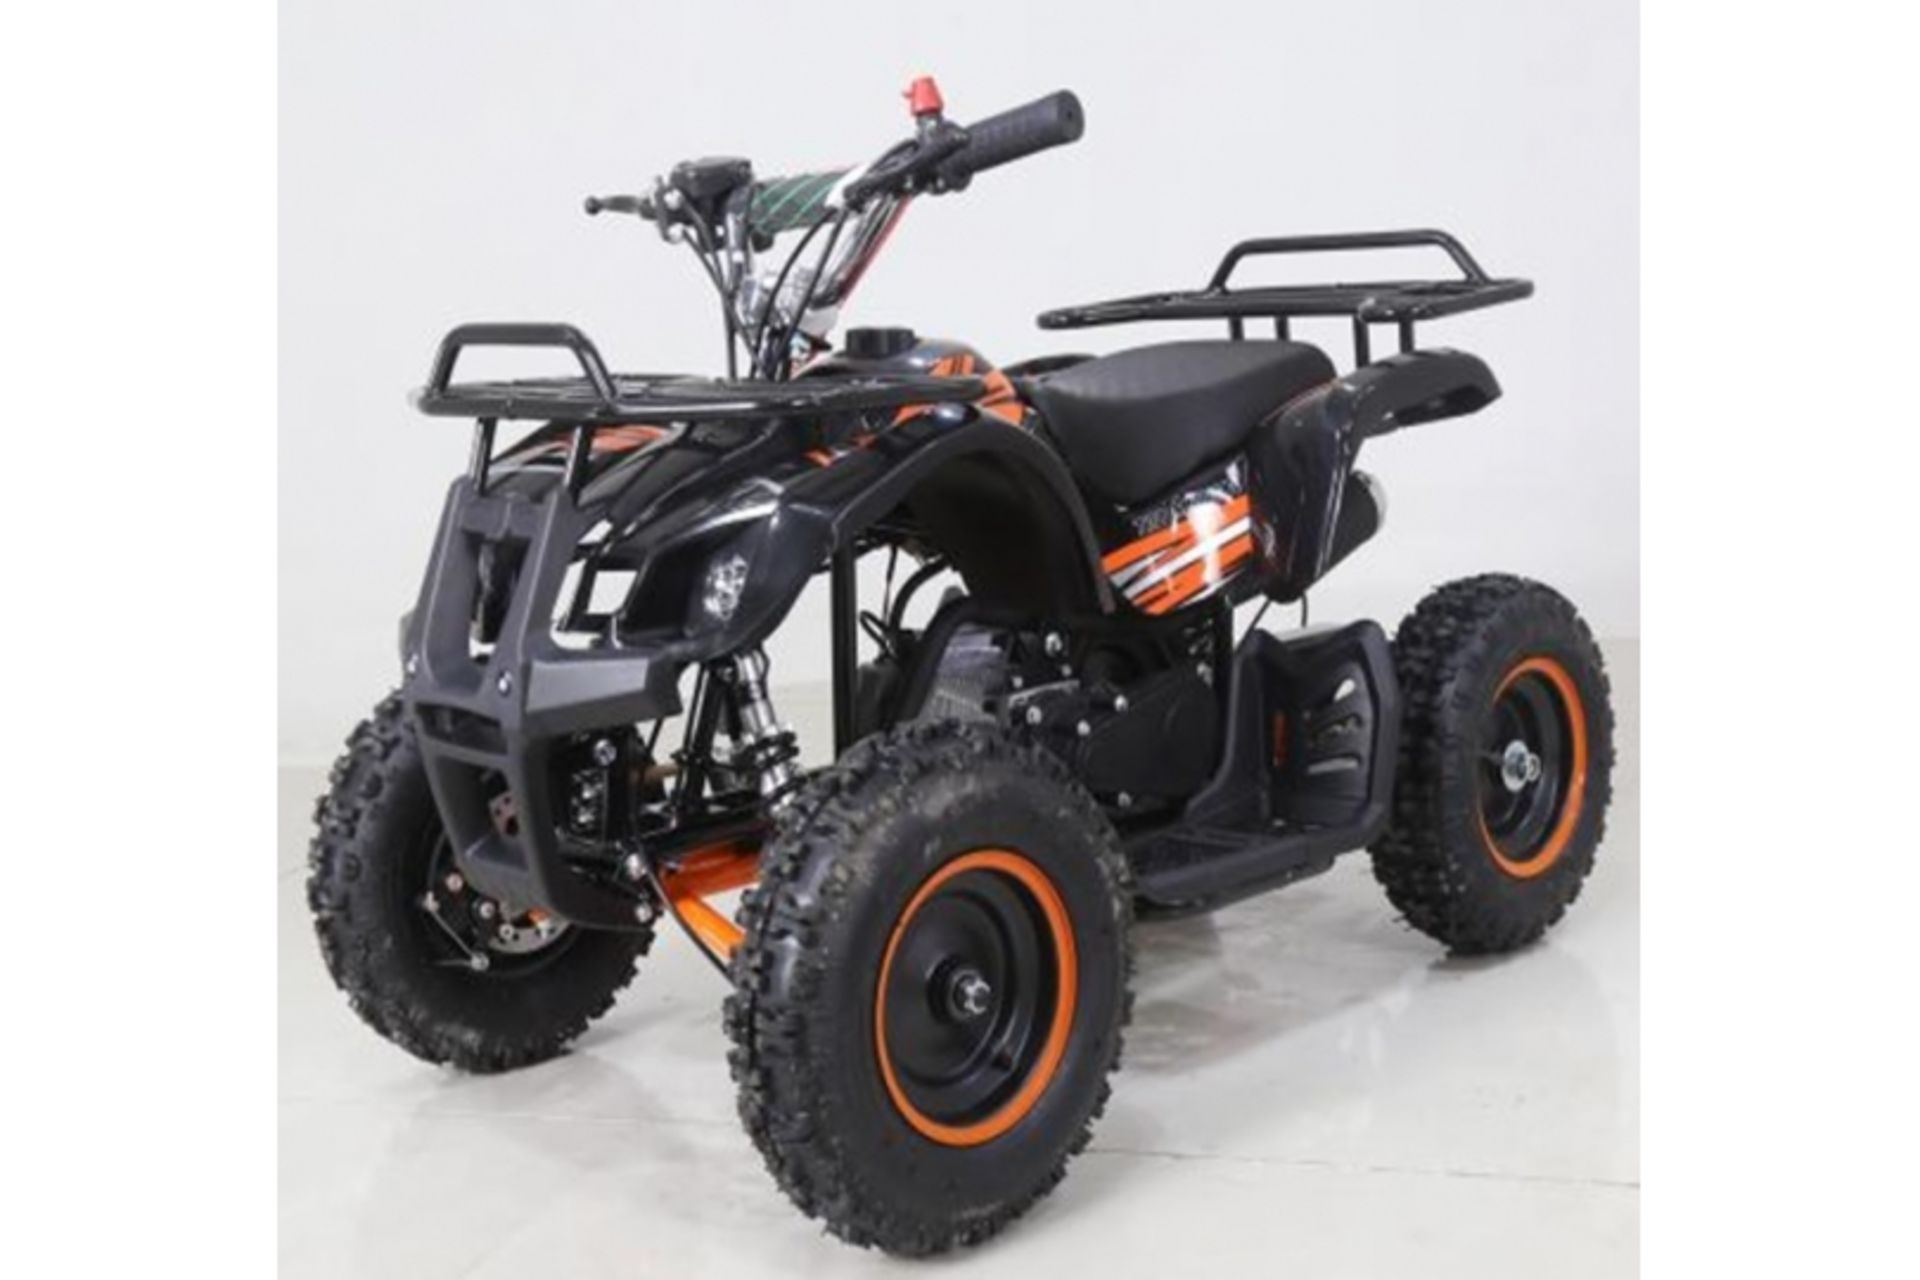 + VAT Brand New 50cc Mini Quad Bike FRM - Colours May Vary - Available Approx 7 Working Days After